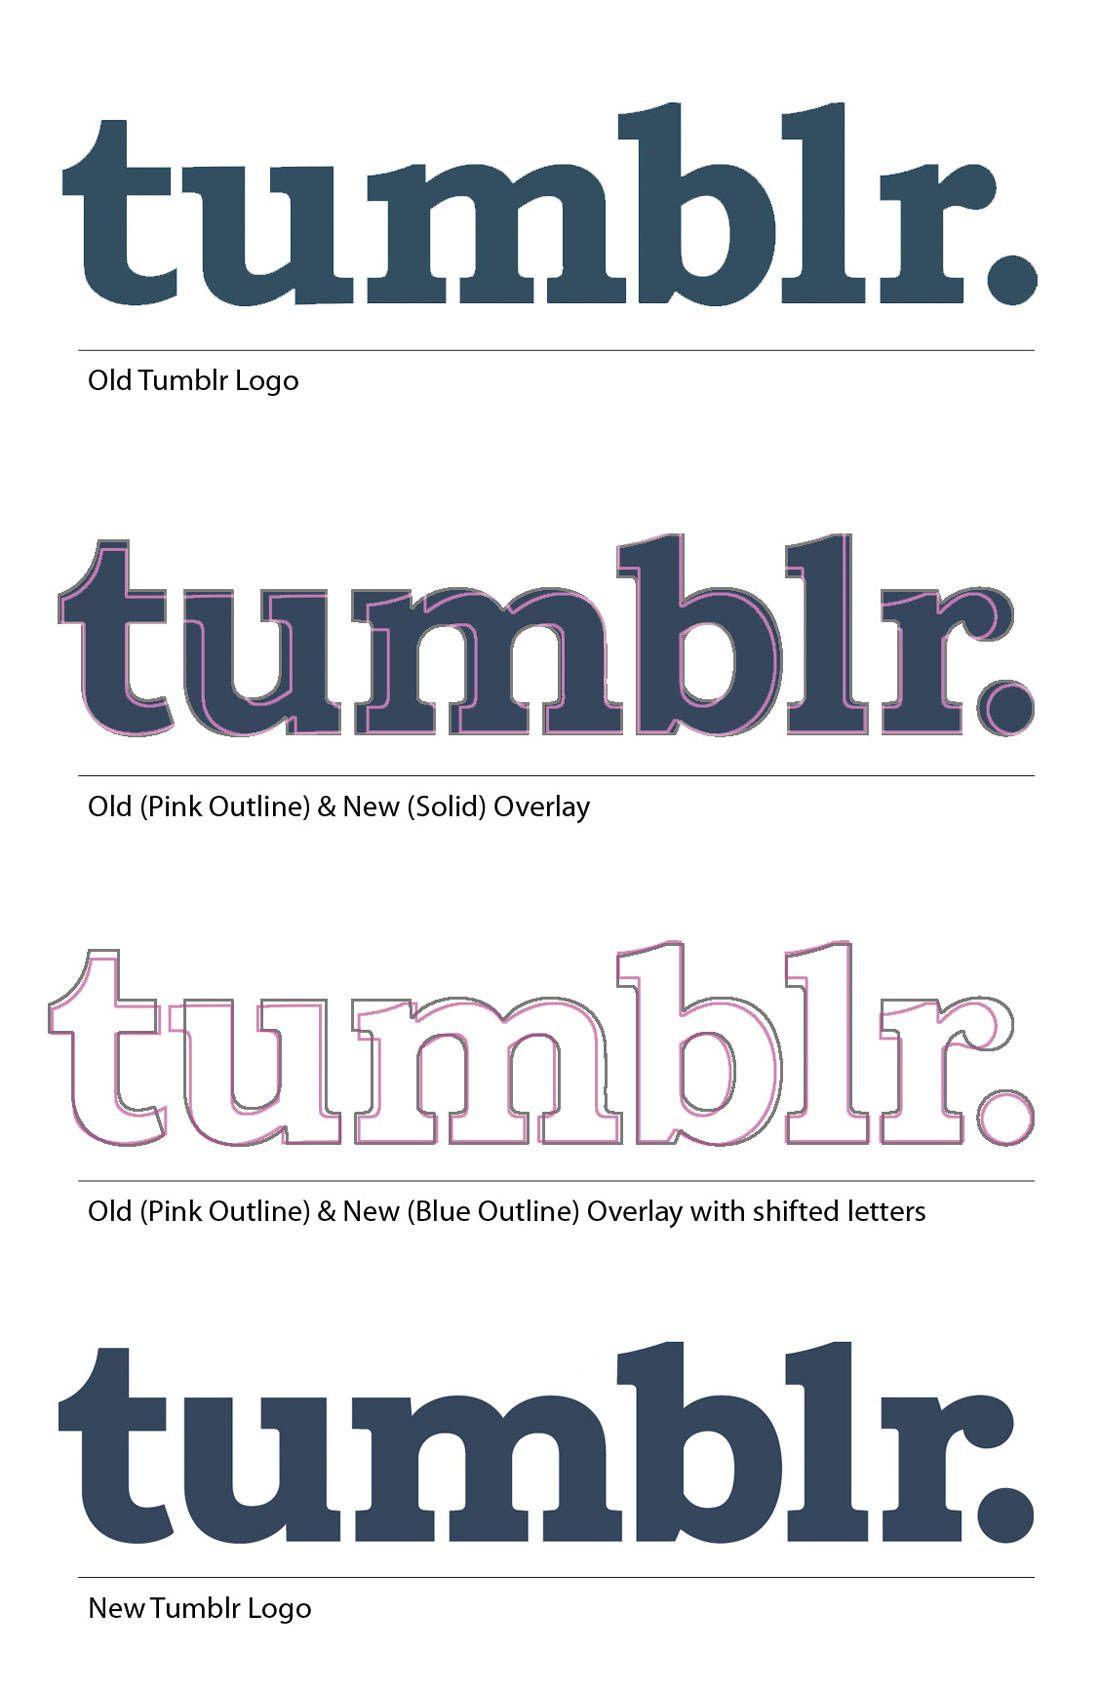 Tumblr Old Logo - Tumblr Gets a New Logo - See What's Different Between the Old and New